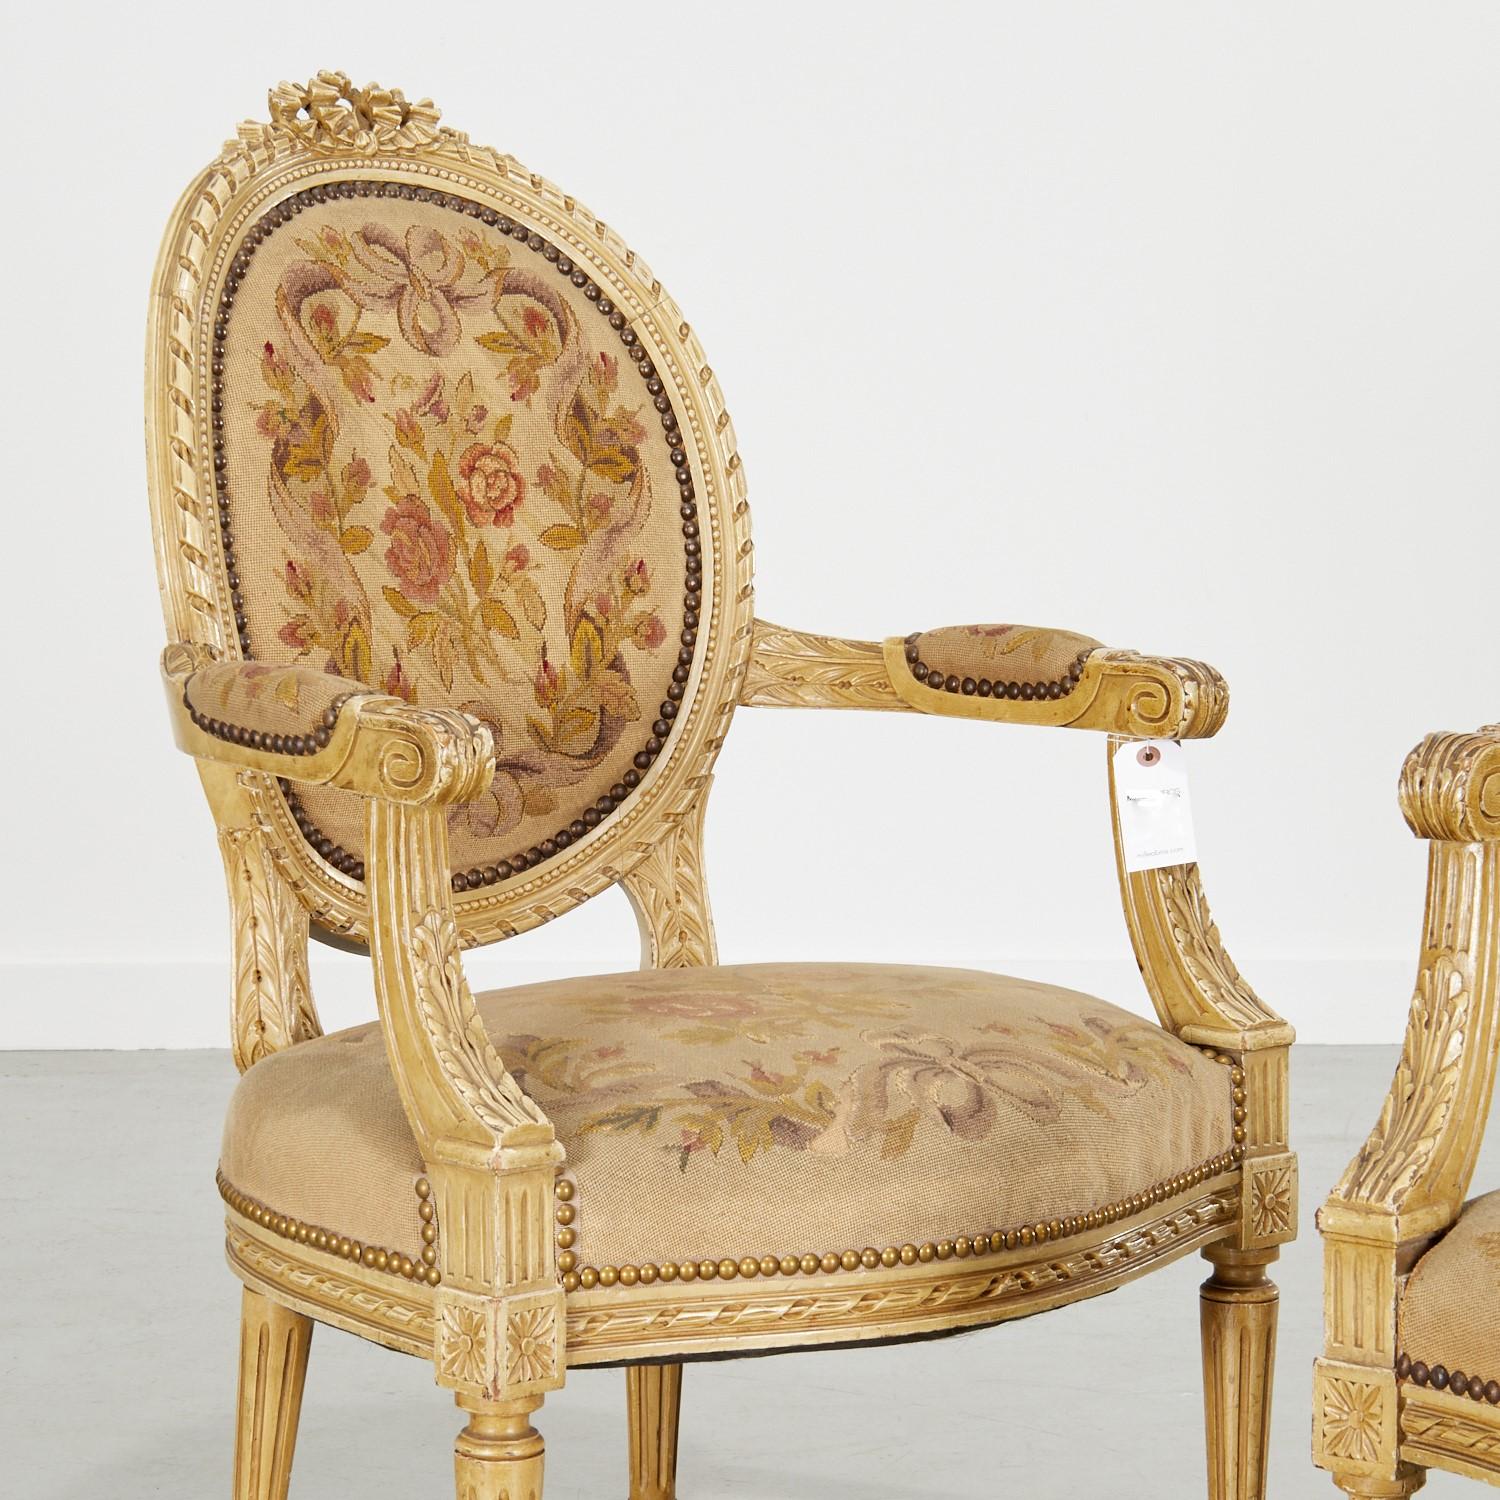 19th c., France, a lovely pair of fauteuils with painted carved wood frames, wool needlepoint embroidered upholstery and brass nailhead trim. Elaborately carved with folded ribbon crest, foliate ribbon twist back and seat rail frames. The carved and